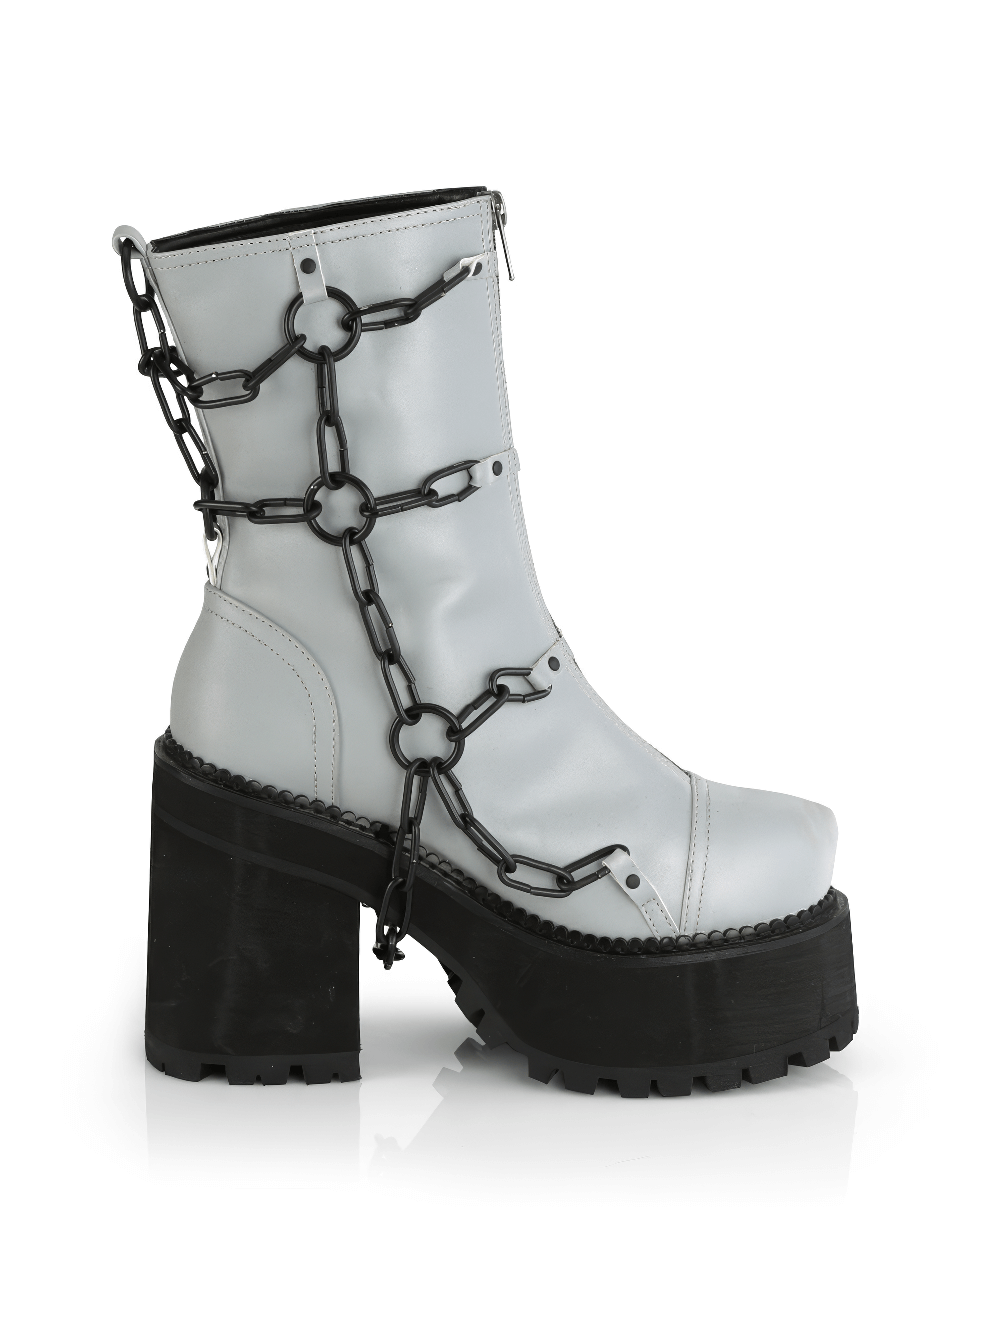 DEMONIA Gray Reflective Vegan Leather Ankle Boot with Chain